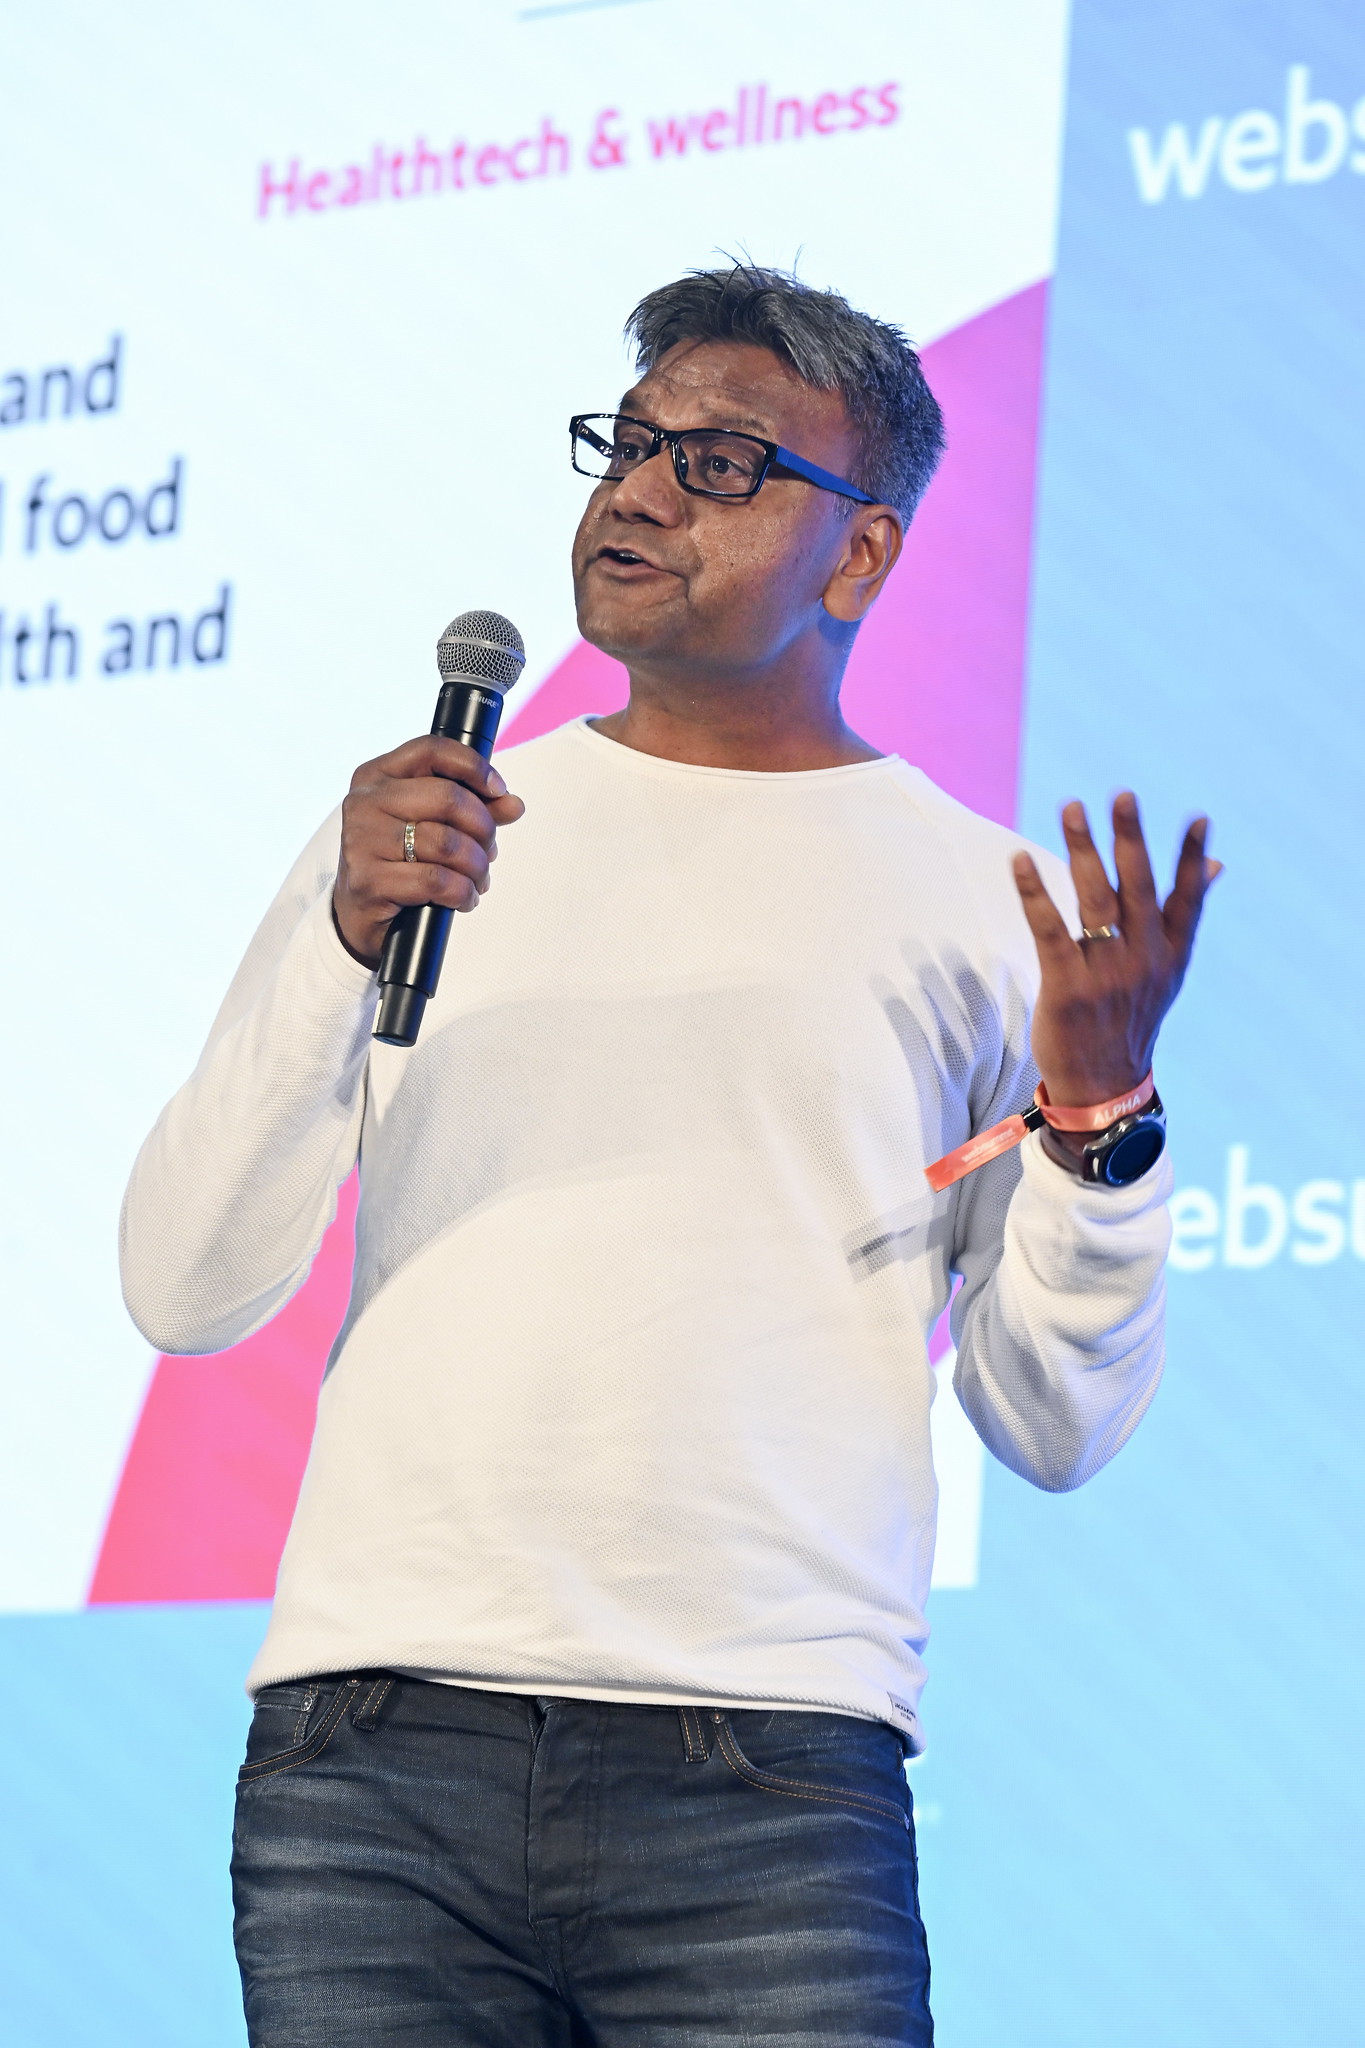 A photo of a person, Yogesh Gupta, founder and CEO of Gaston, speaking onstage at Web Summit. They are holding a microphone and gesturing with their hands.